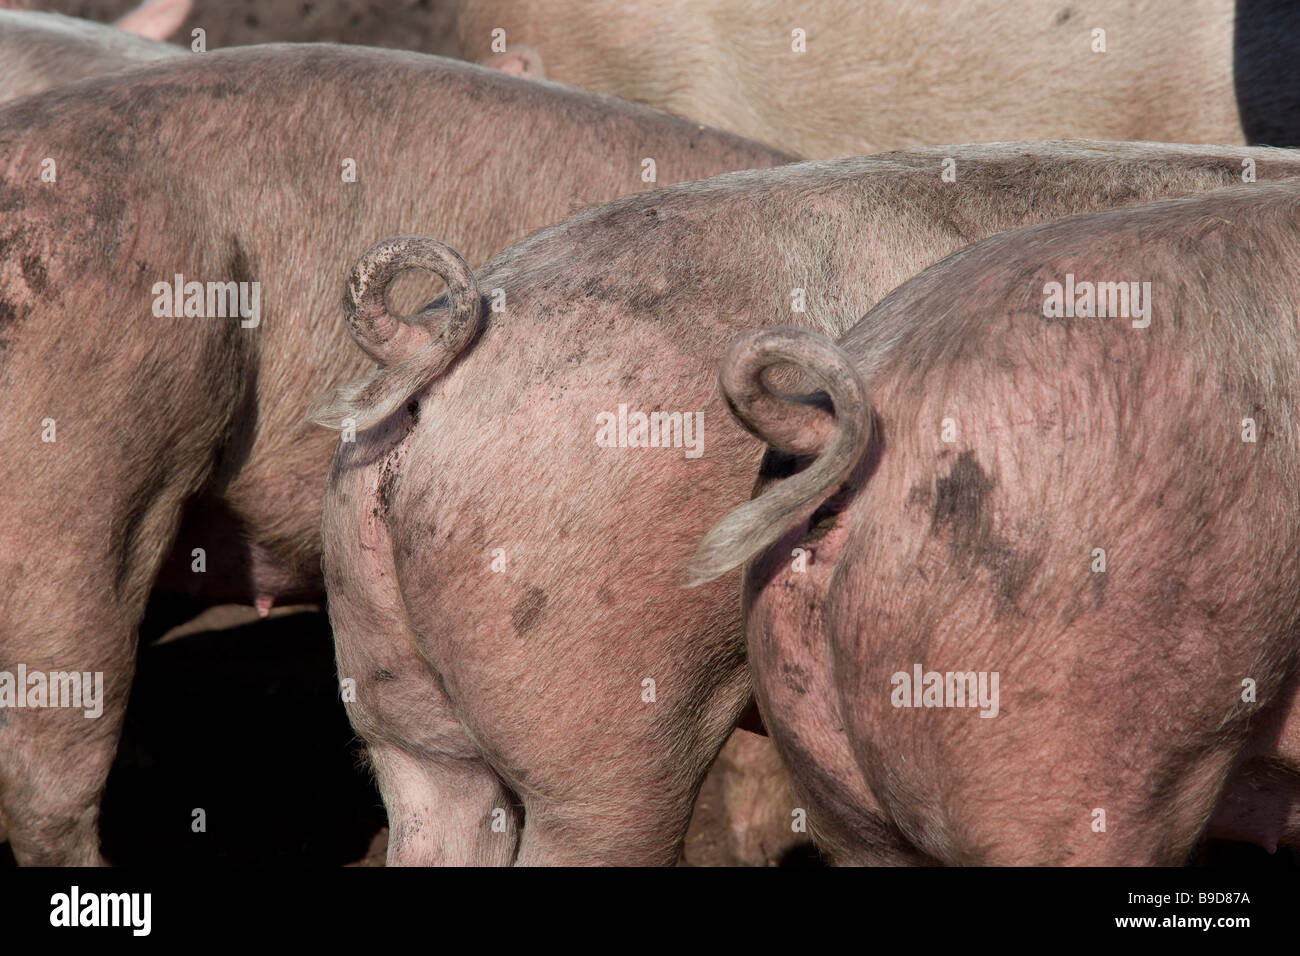 Rear view of pigs with curly pig tails. Charles Lupica Stock Photo